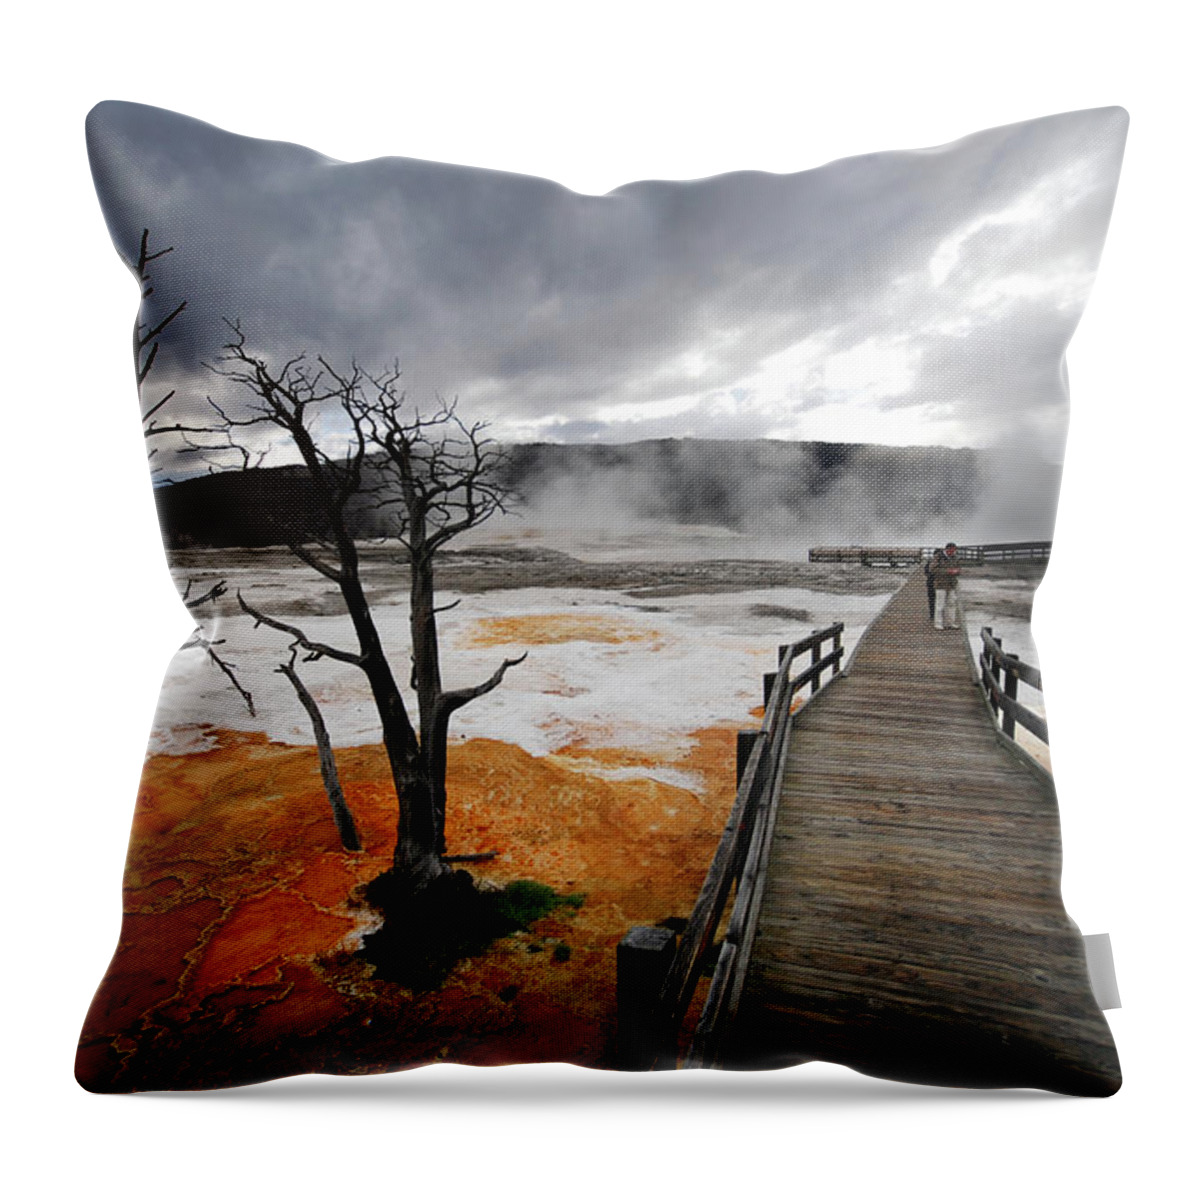 Geology Throw Pillow featuring the photograph Hot Spring Terrace by Piriya Photography